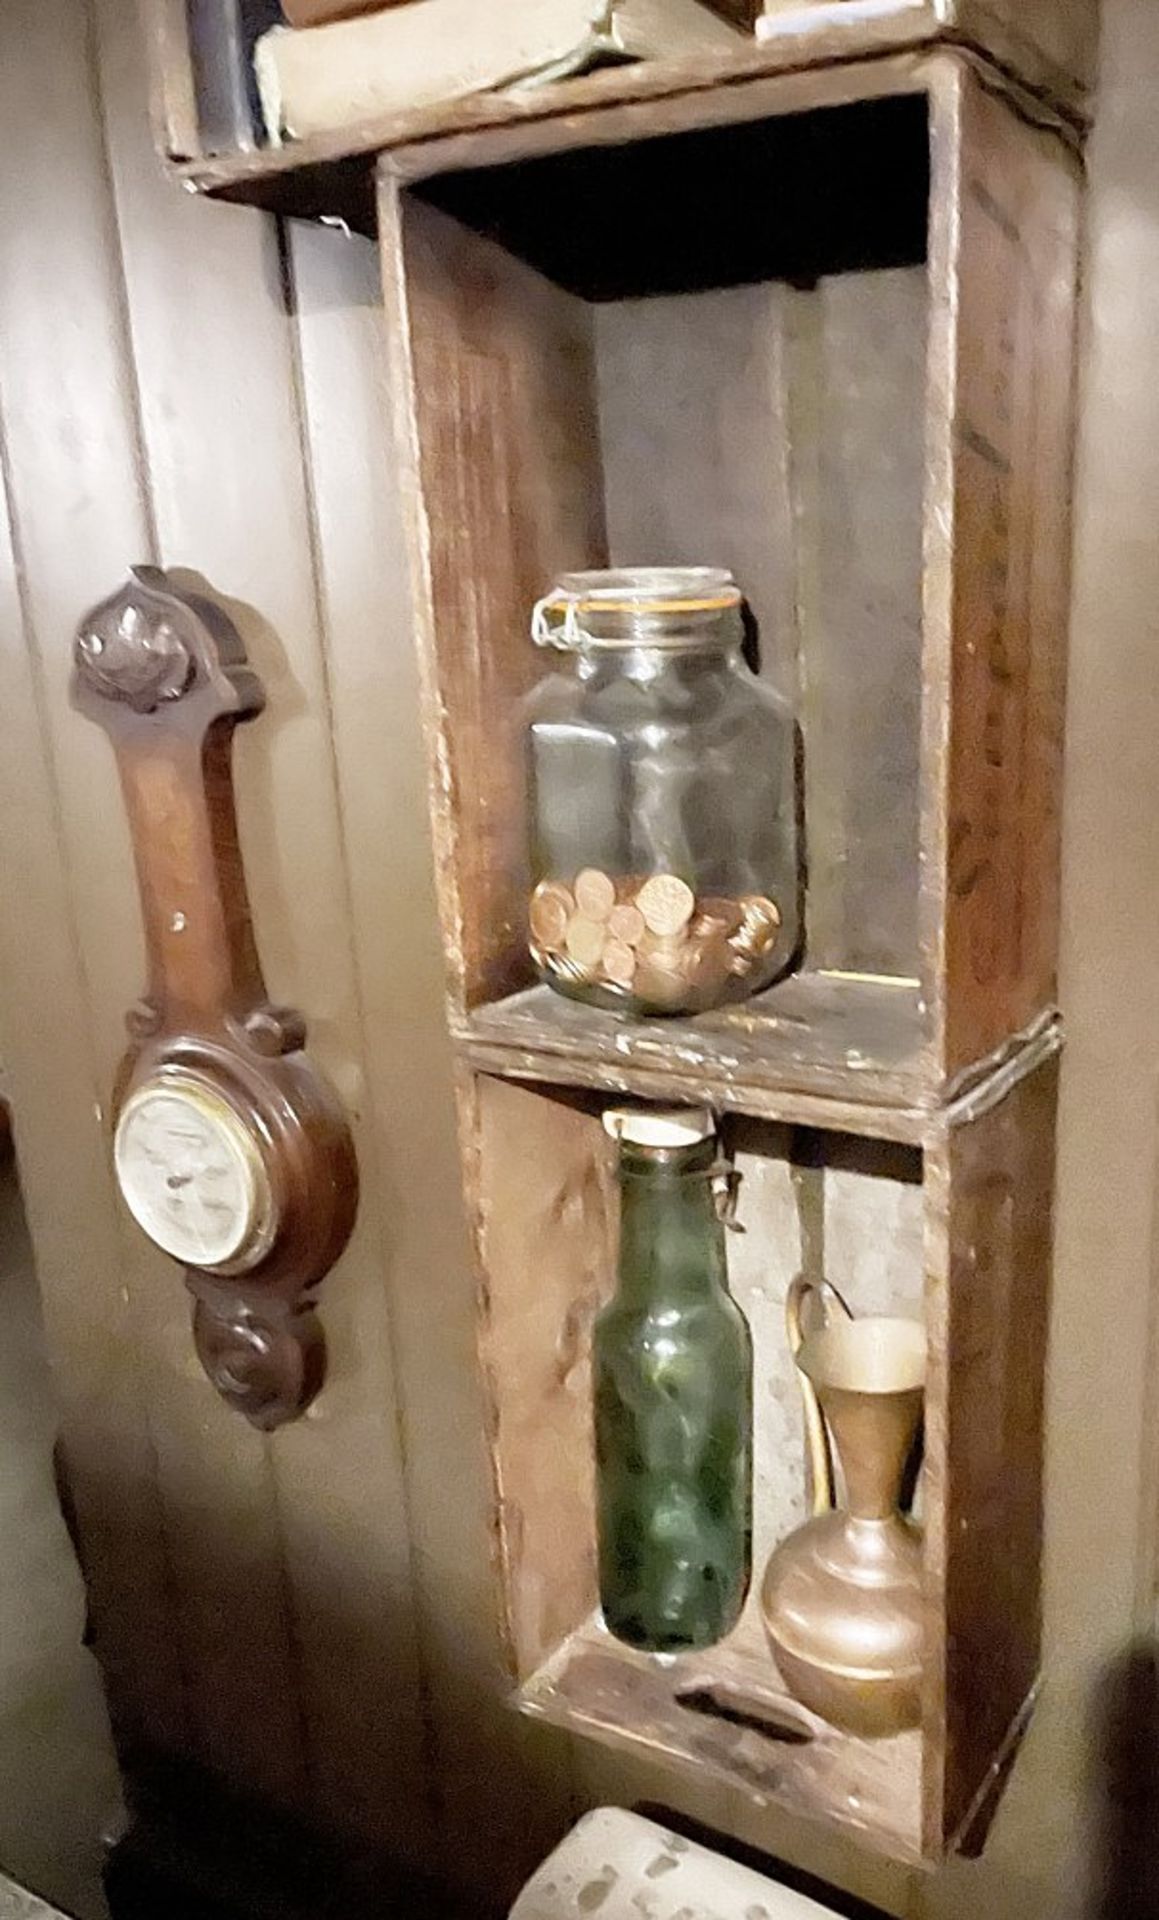 3 x Wall Mounted Soap Boxes and the Vintage Contents Contained Within and Wall Mounted Thermometer